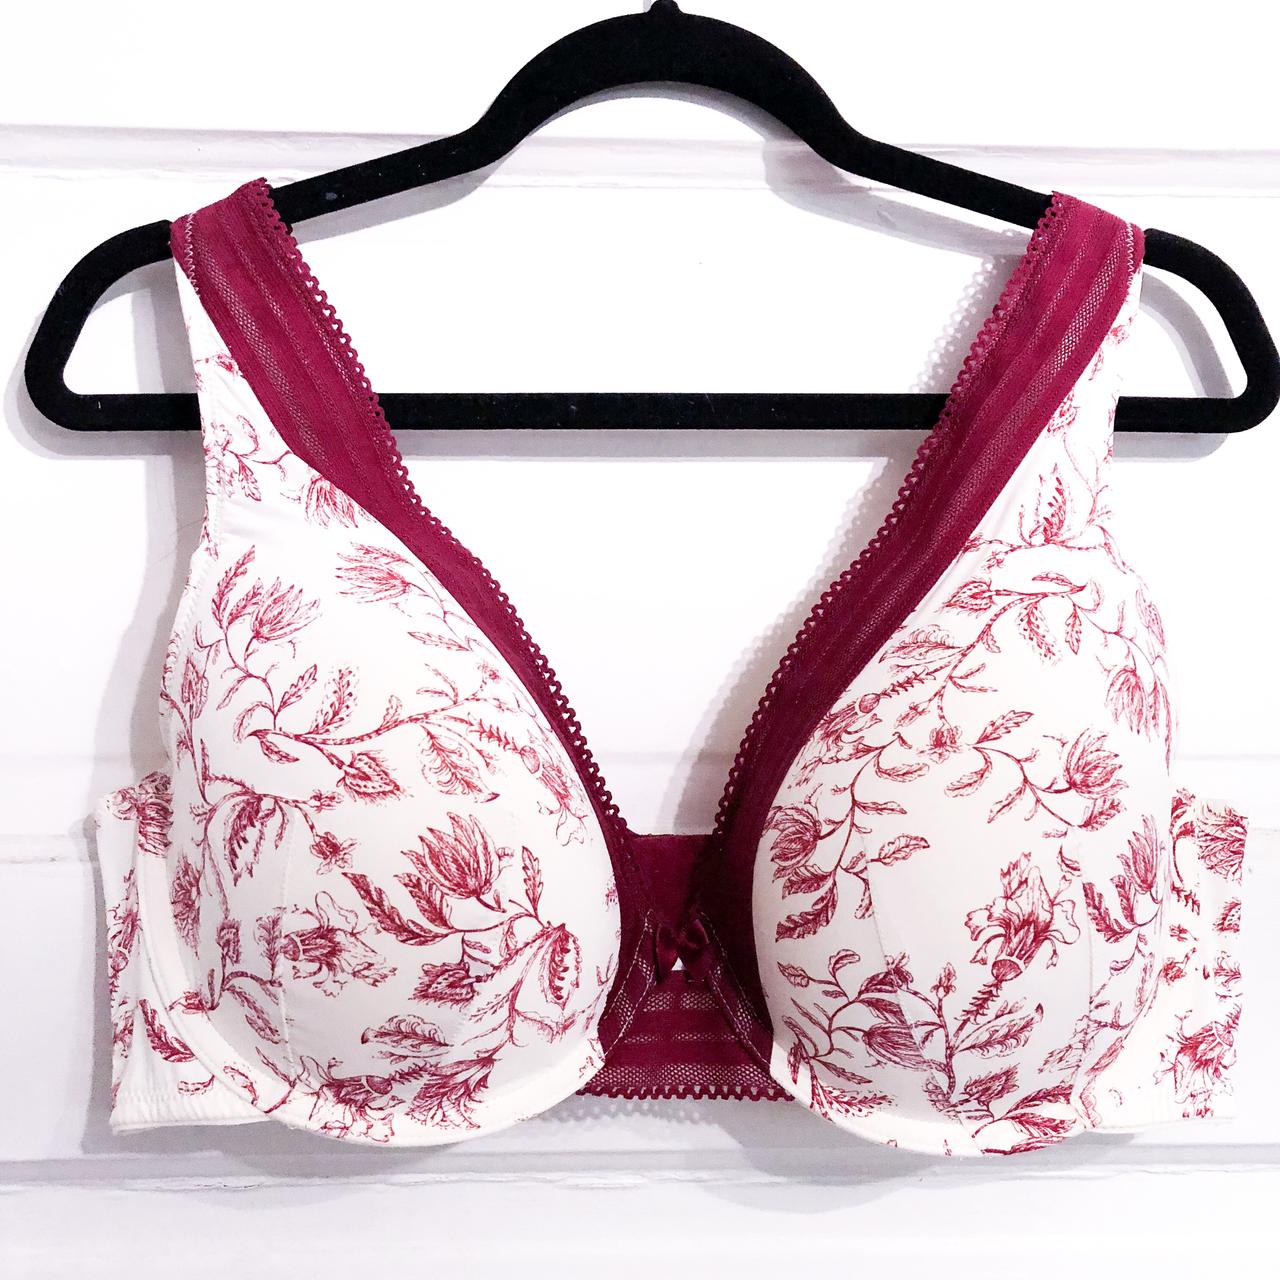 Cacique Lane Bryant Bra 40DD in a lovely maroon red - Depop